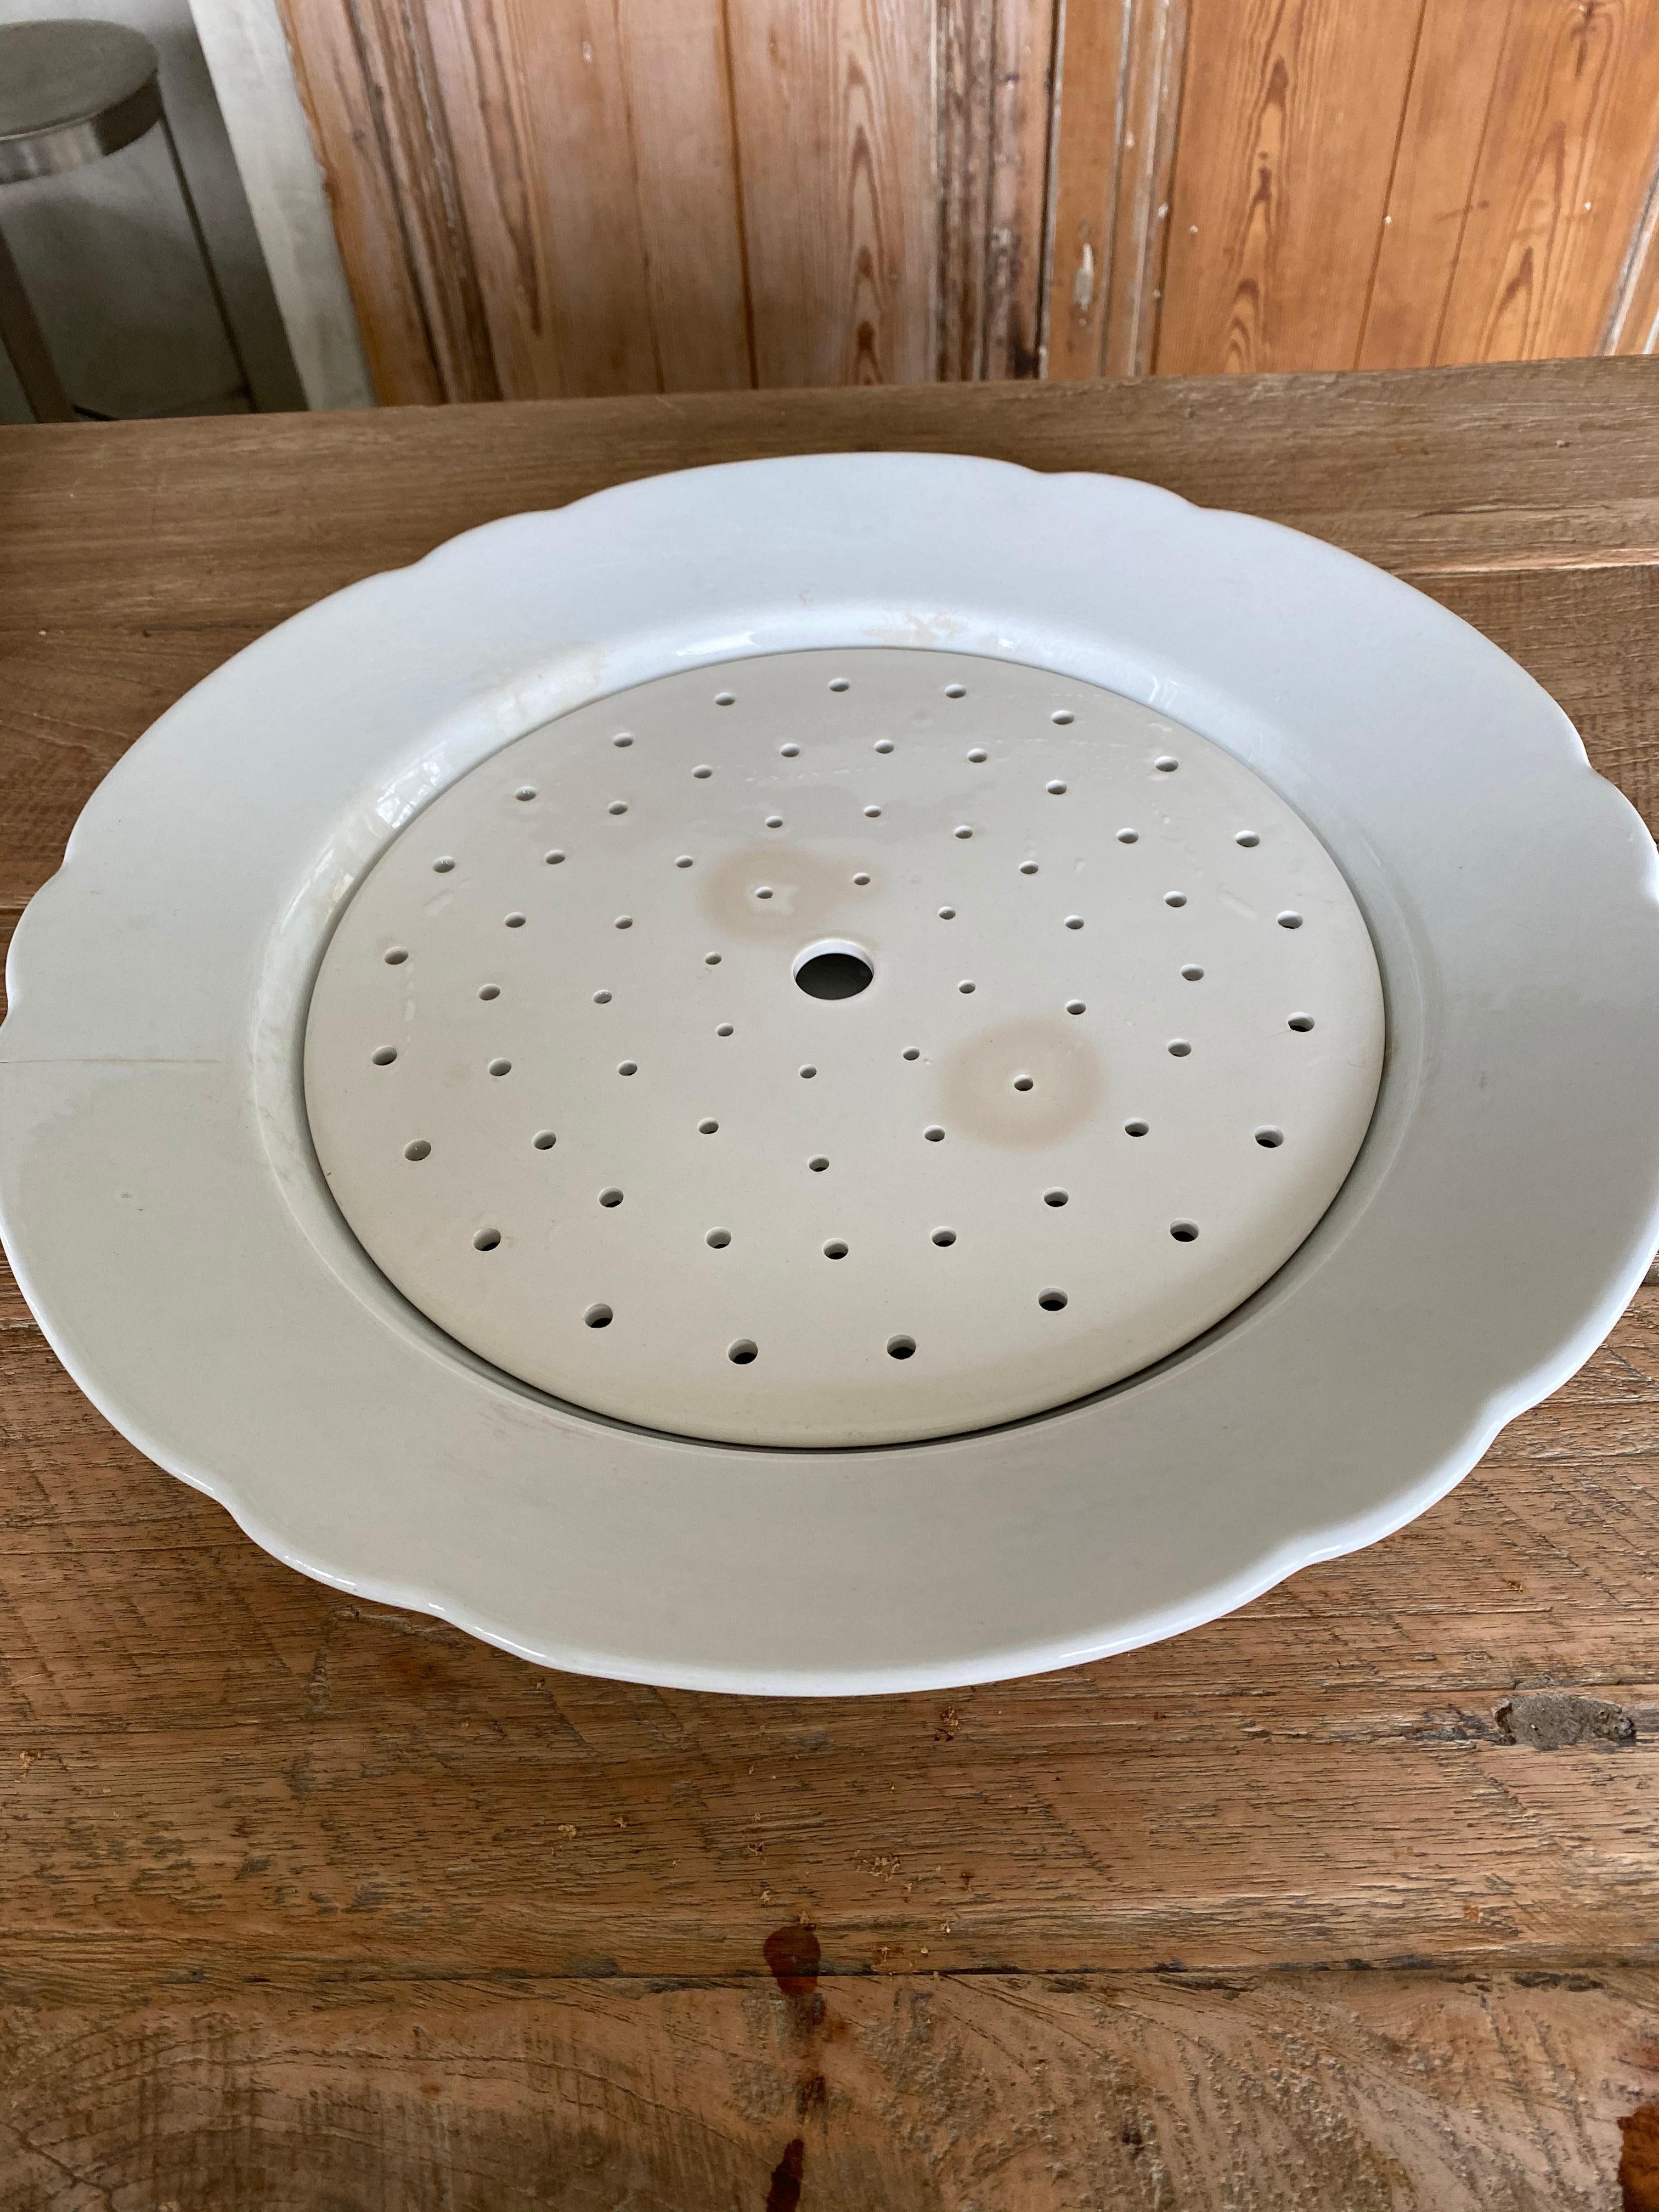 Add elegance to your dining experience. The large Dutch white ironstone meat or fish serving platter with drainer or drain plate dating from the end of the 19th century. Marked 